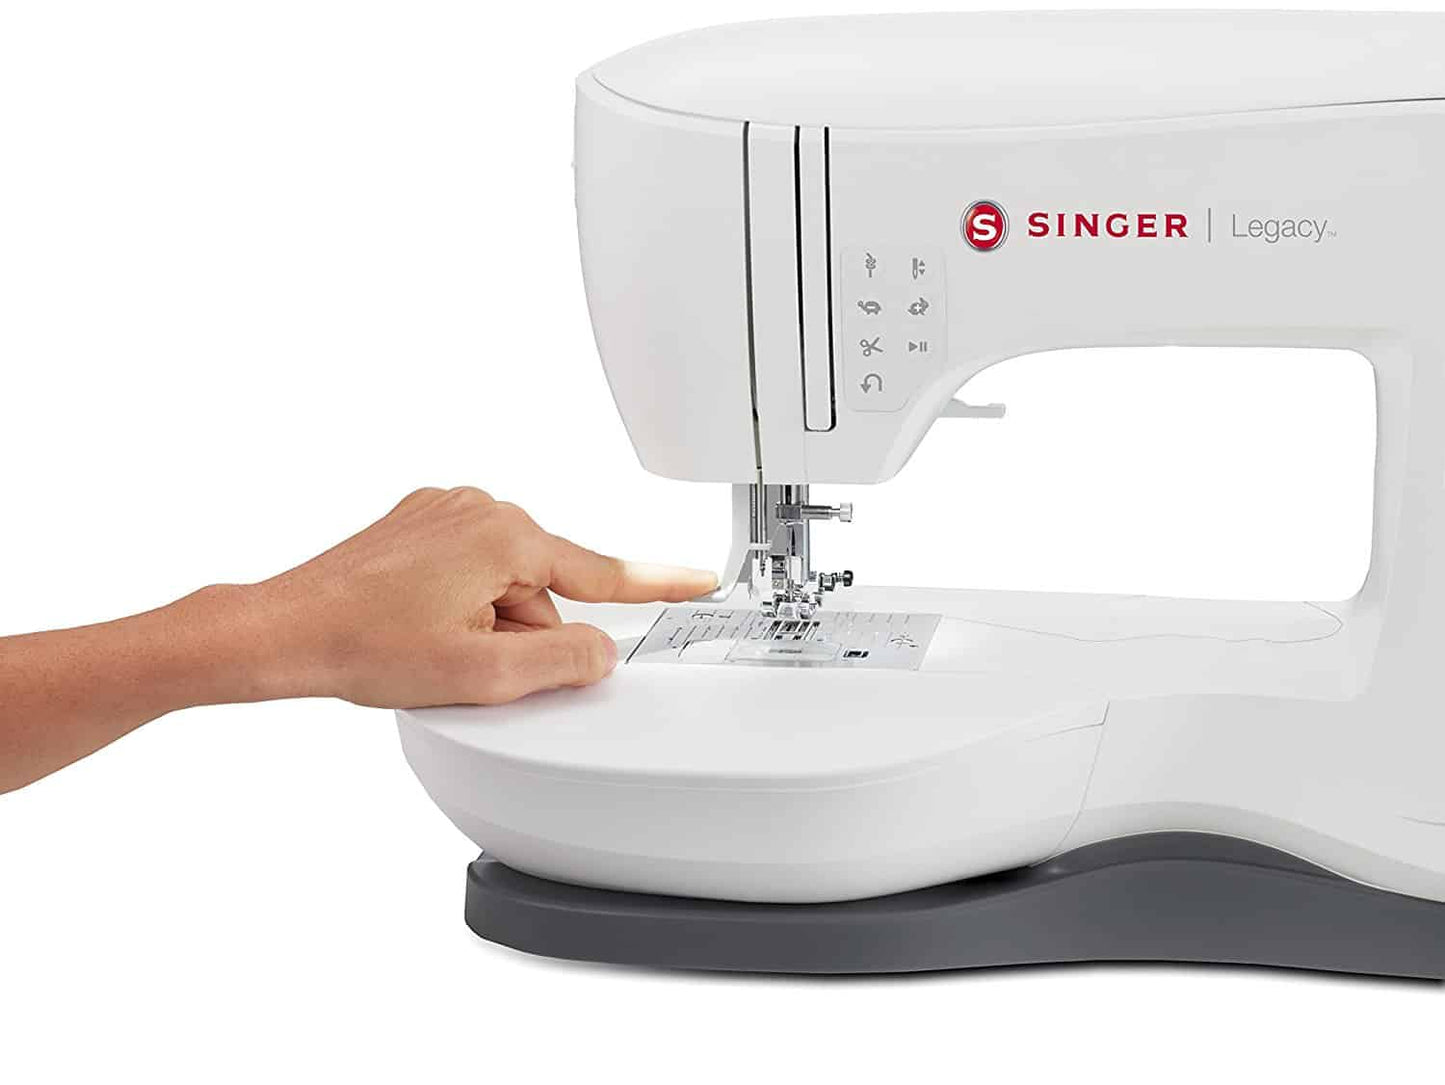 Singer Legacy SE300 - Sewing & Embroidery Machine - Good as New